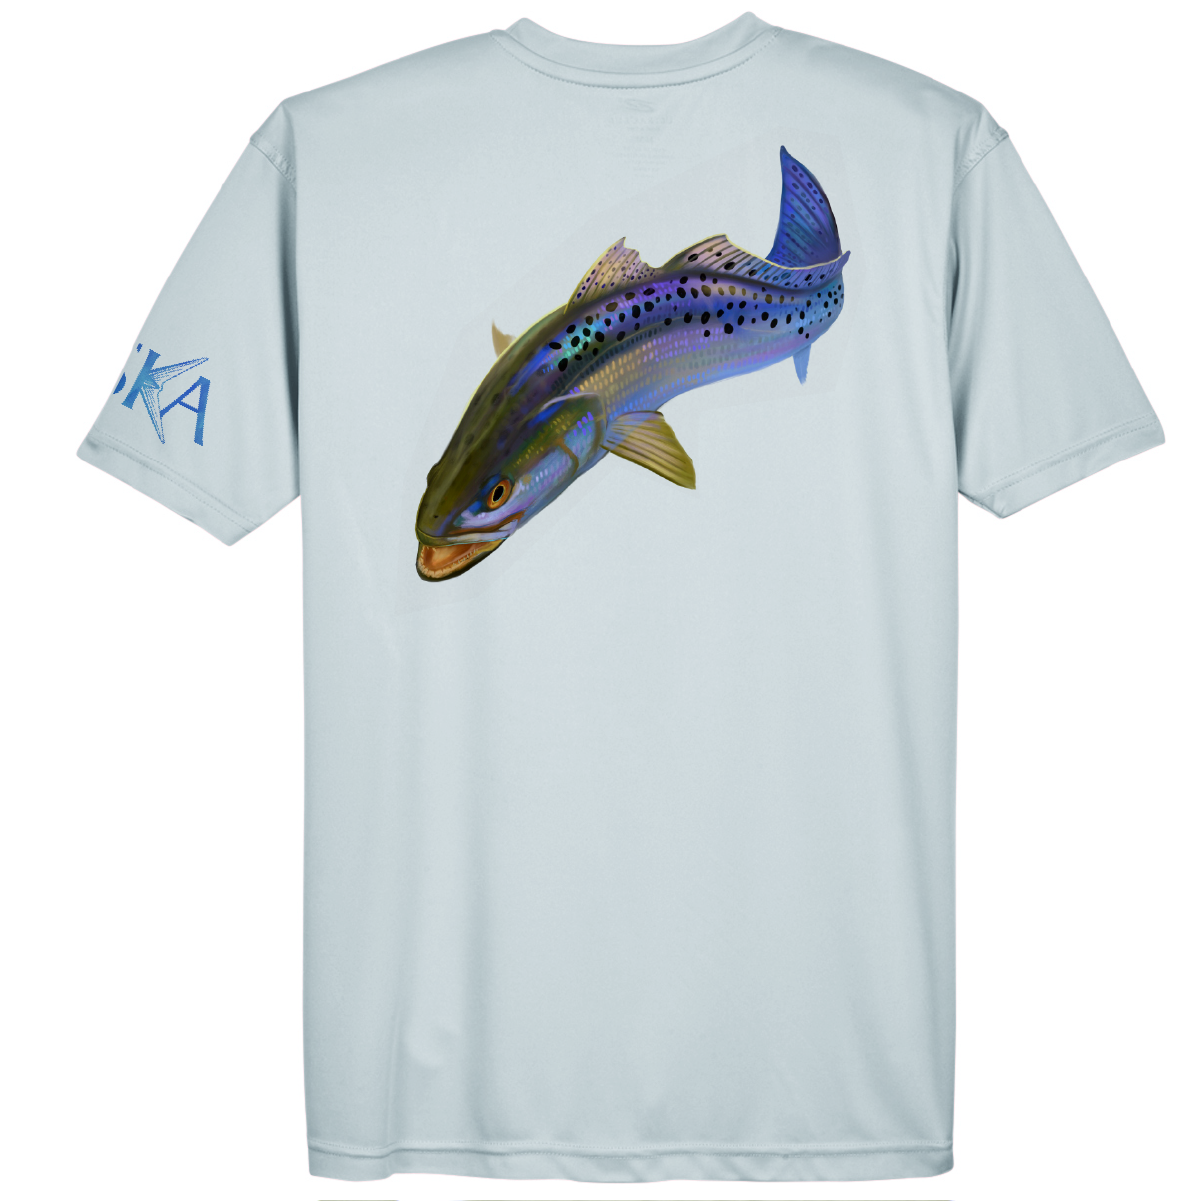 Trout Short-Sleeve Dry-Fit Shirt